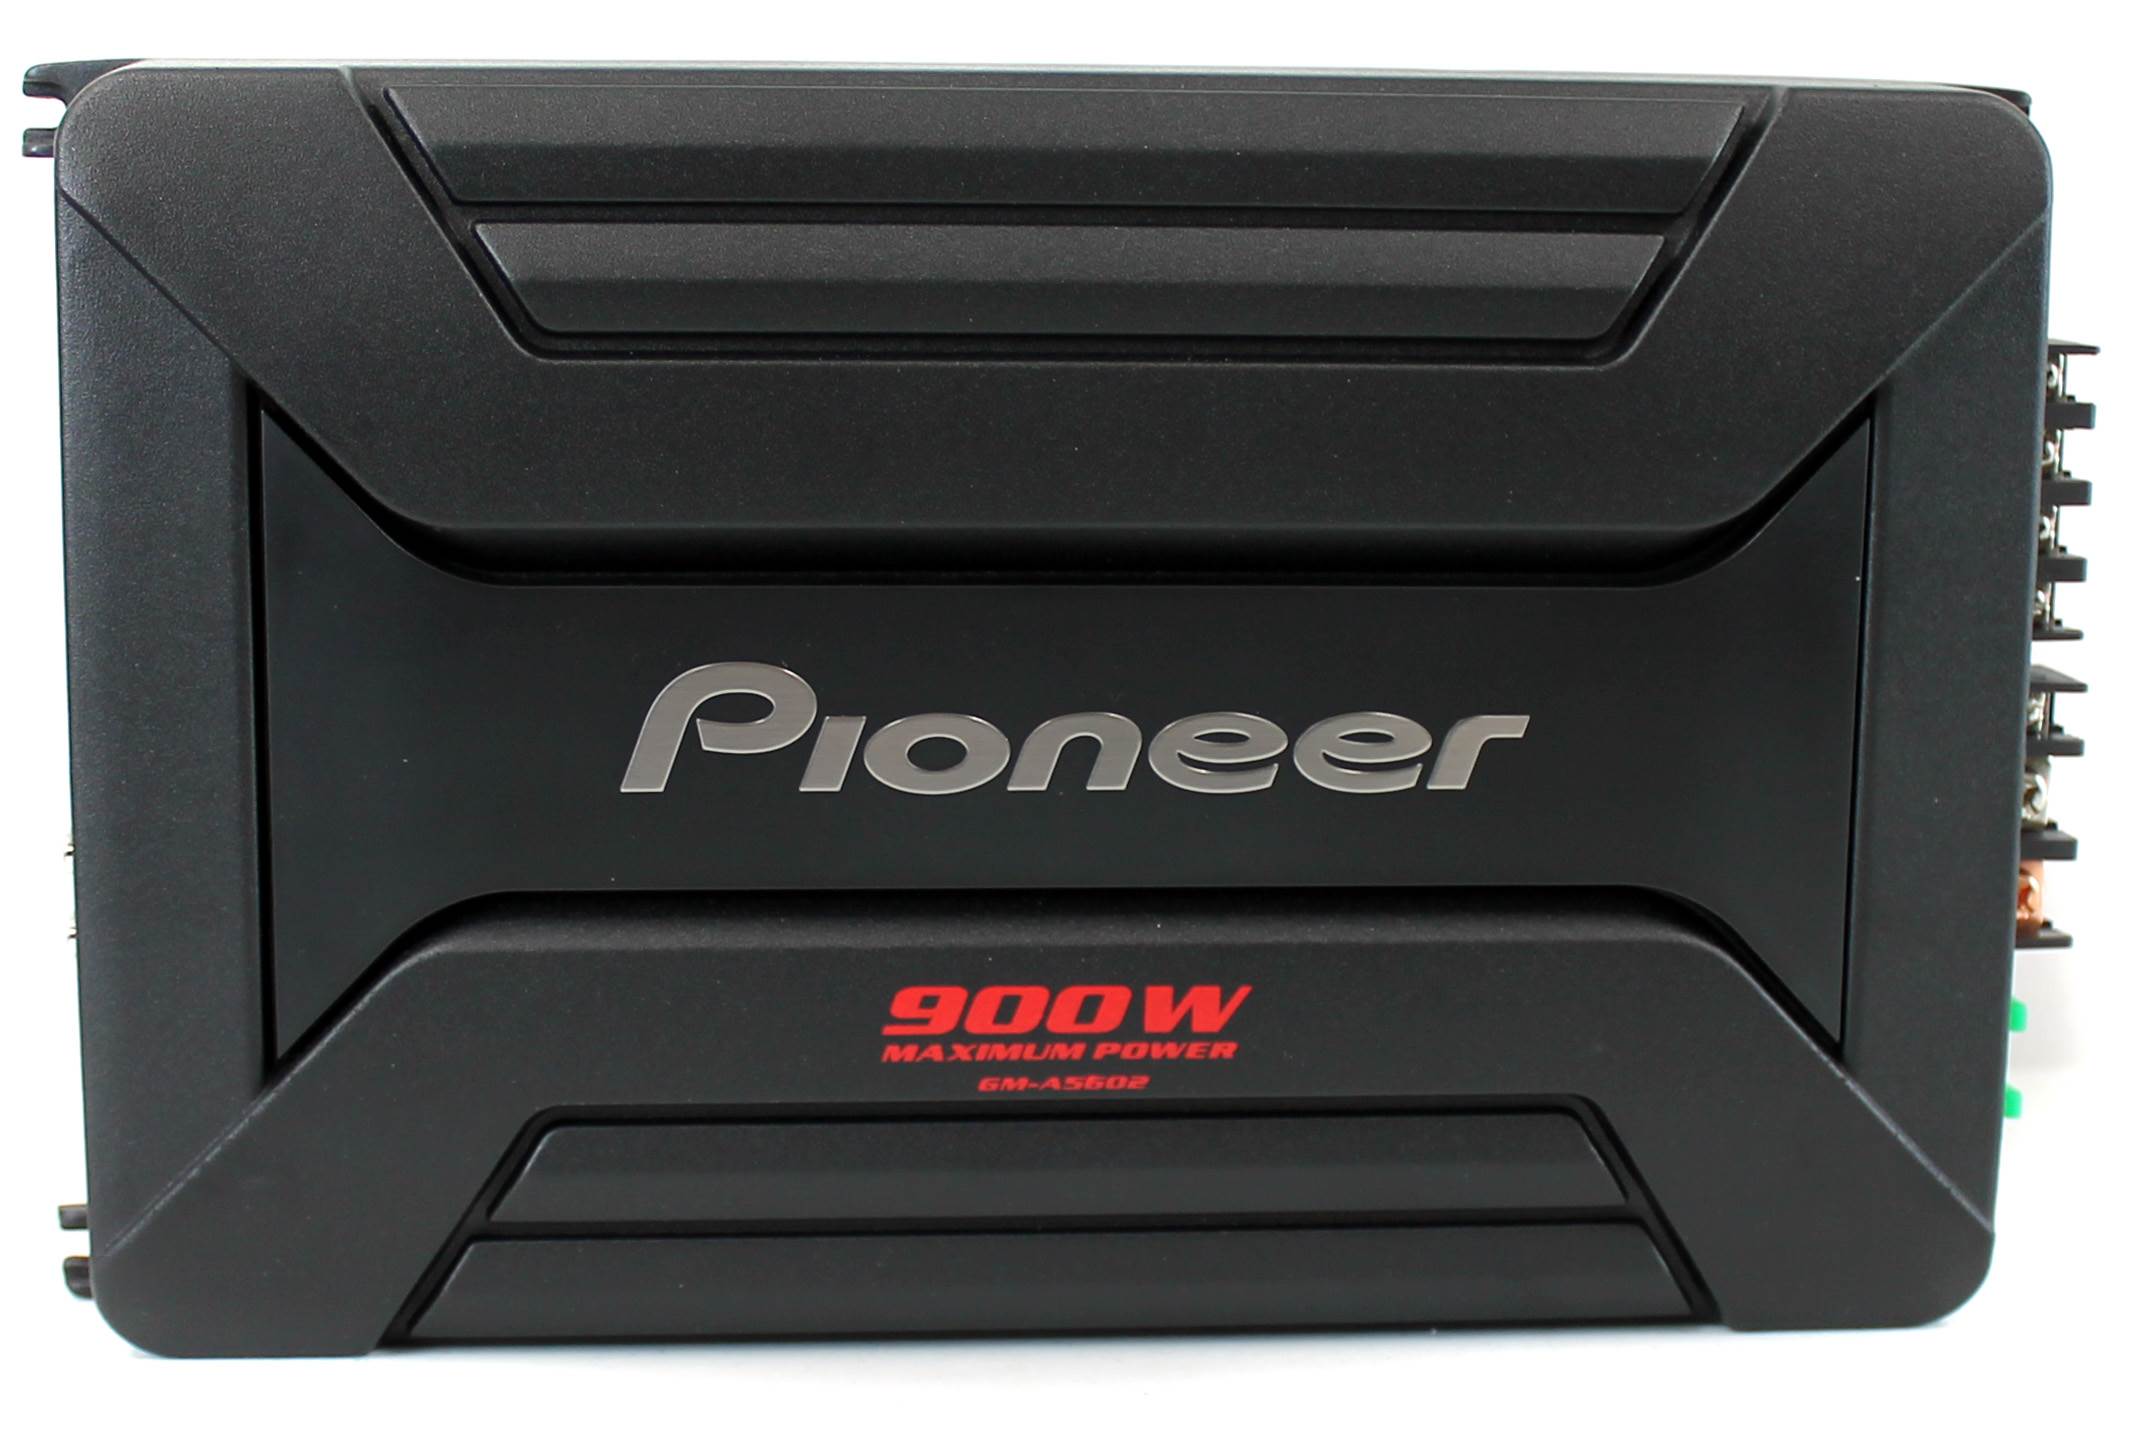 Pioneer GM-A5602 2-Channel Bridgeable Amplifier with 900 Watts Max Power and Bass Boost Control - image 2 of 5